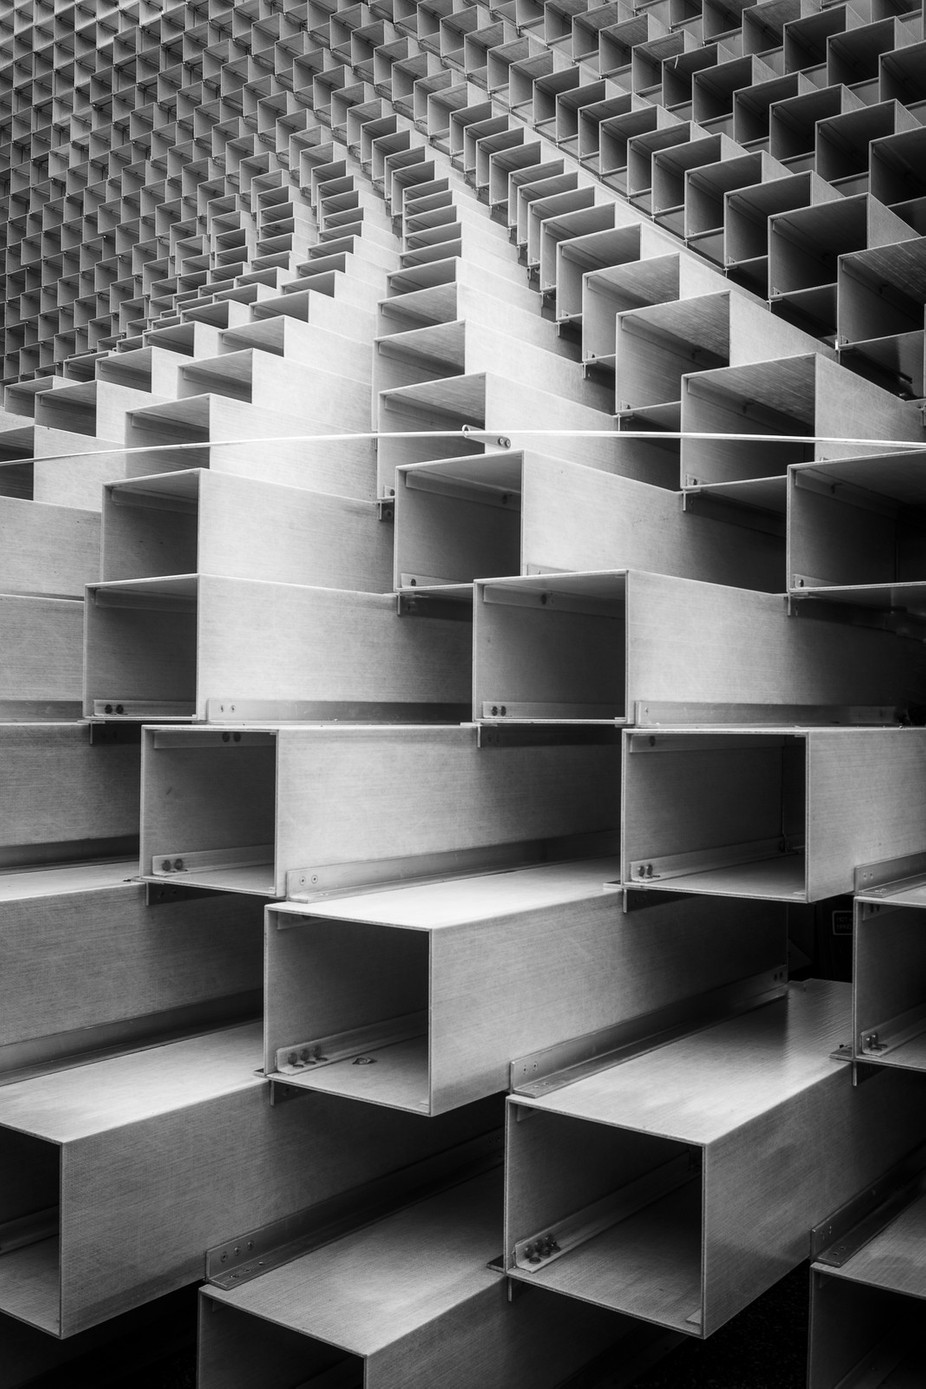 Abstracts in Architecture - the Serpentine Pavilion 2016 by jfischerphotography - Monochrome Geometry Photo Contest